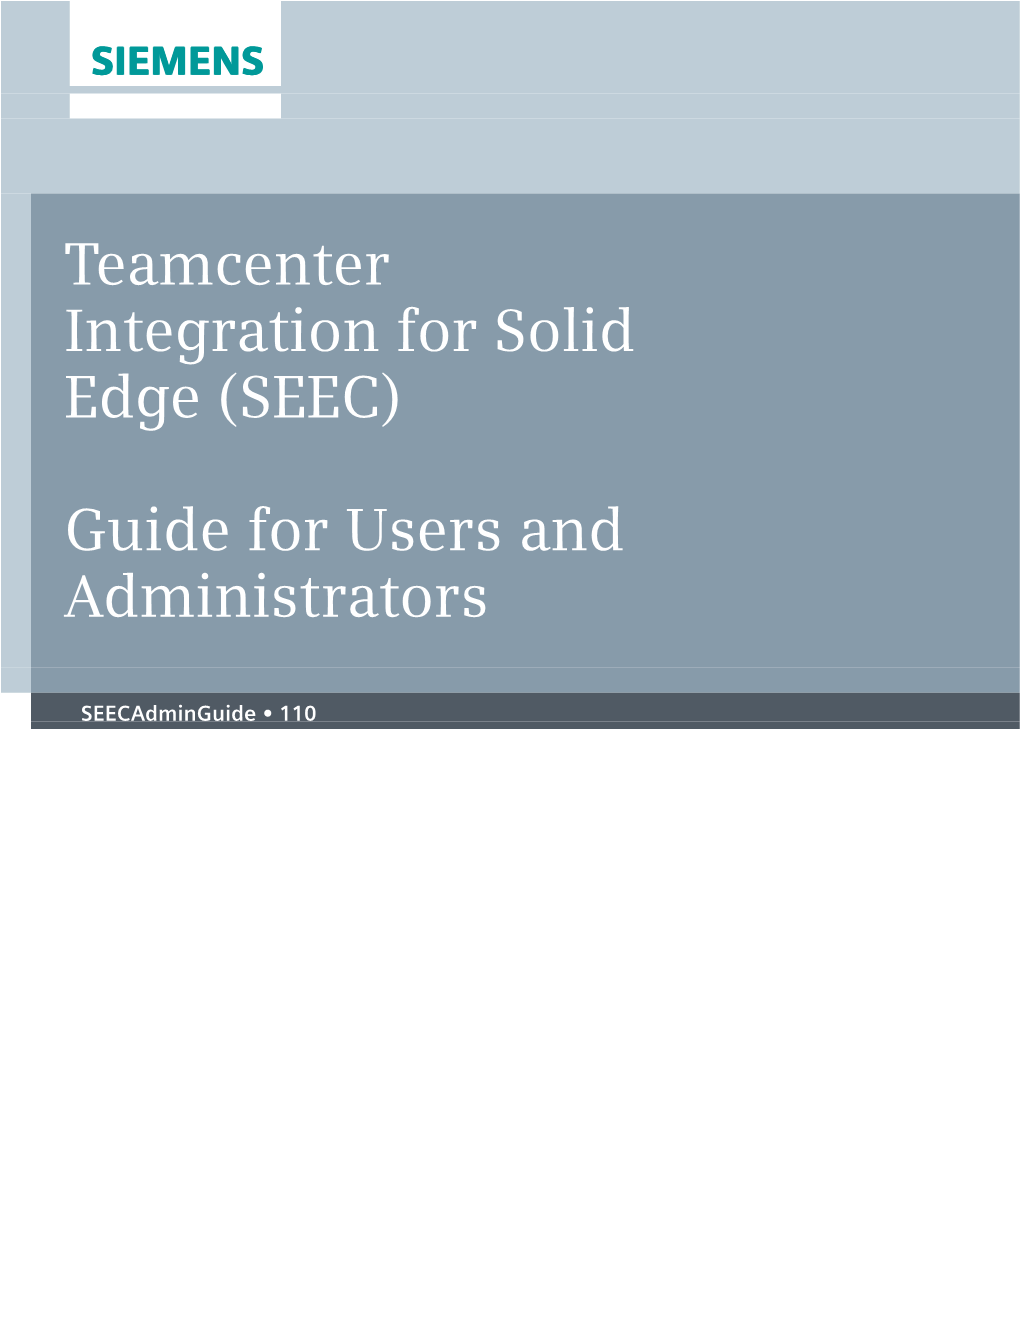 Teamcenter Integration for Solid Edge (SEEC) Guide for Users and Administrators 3 Cocontentsntents